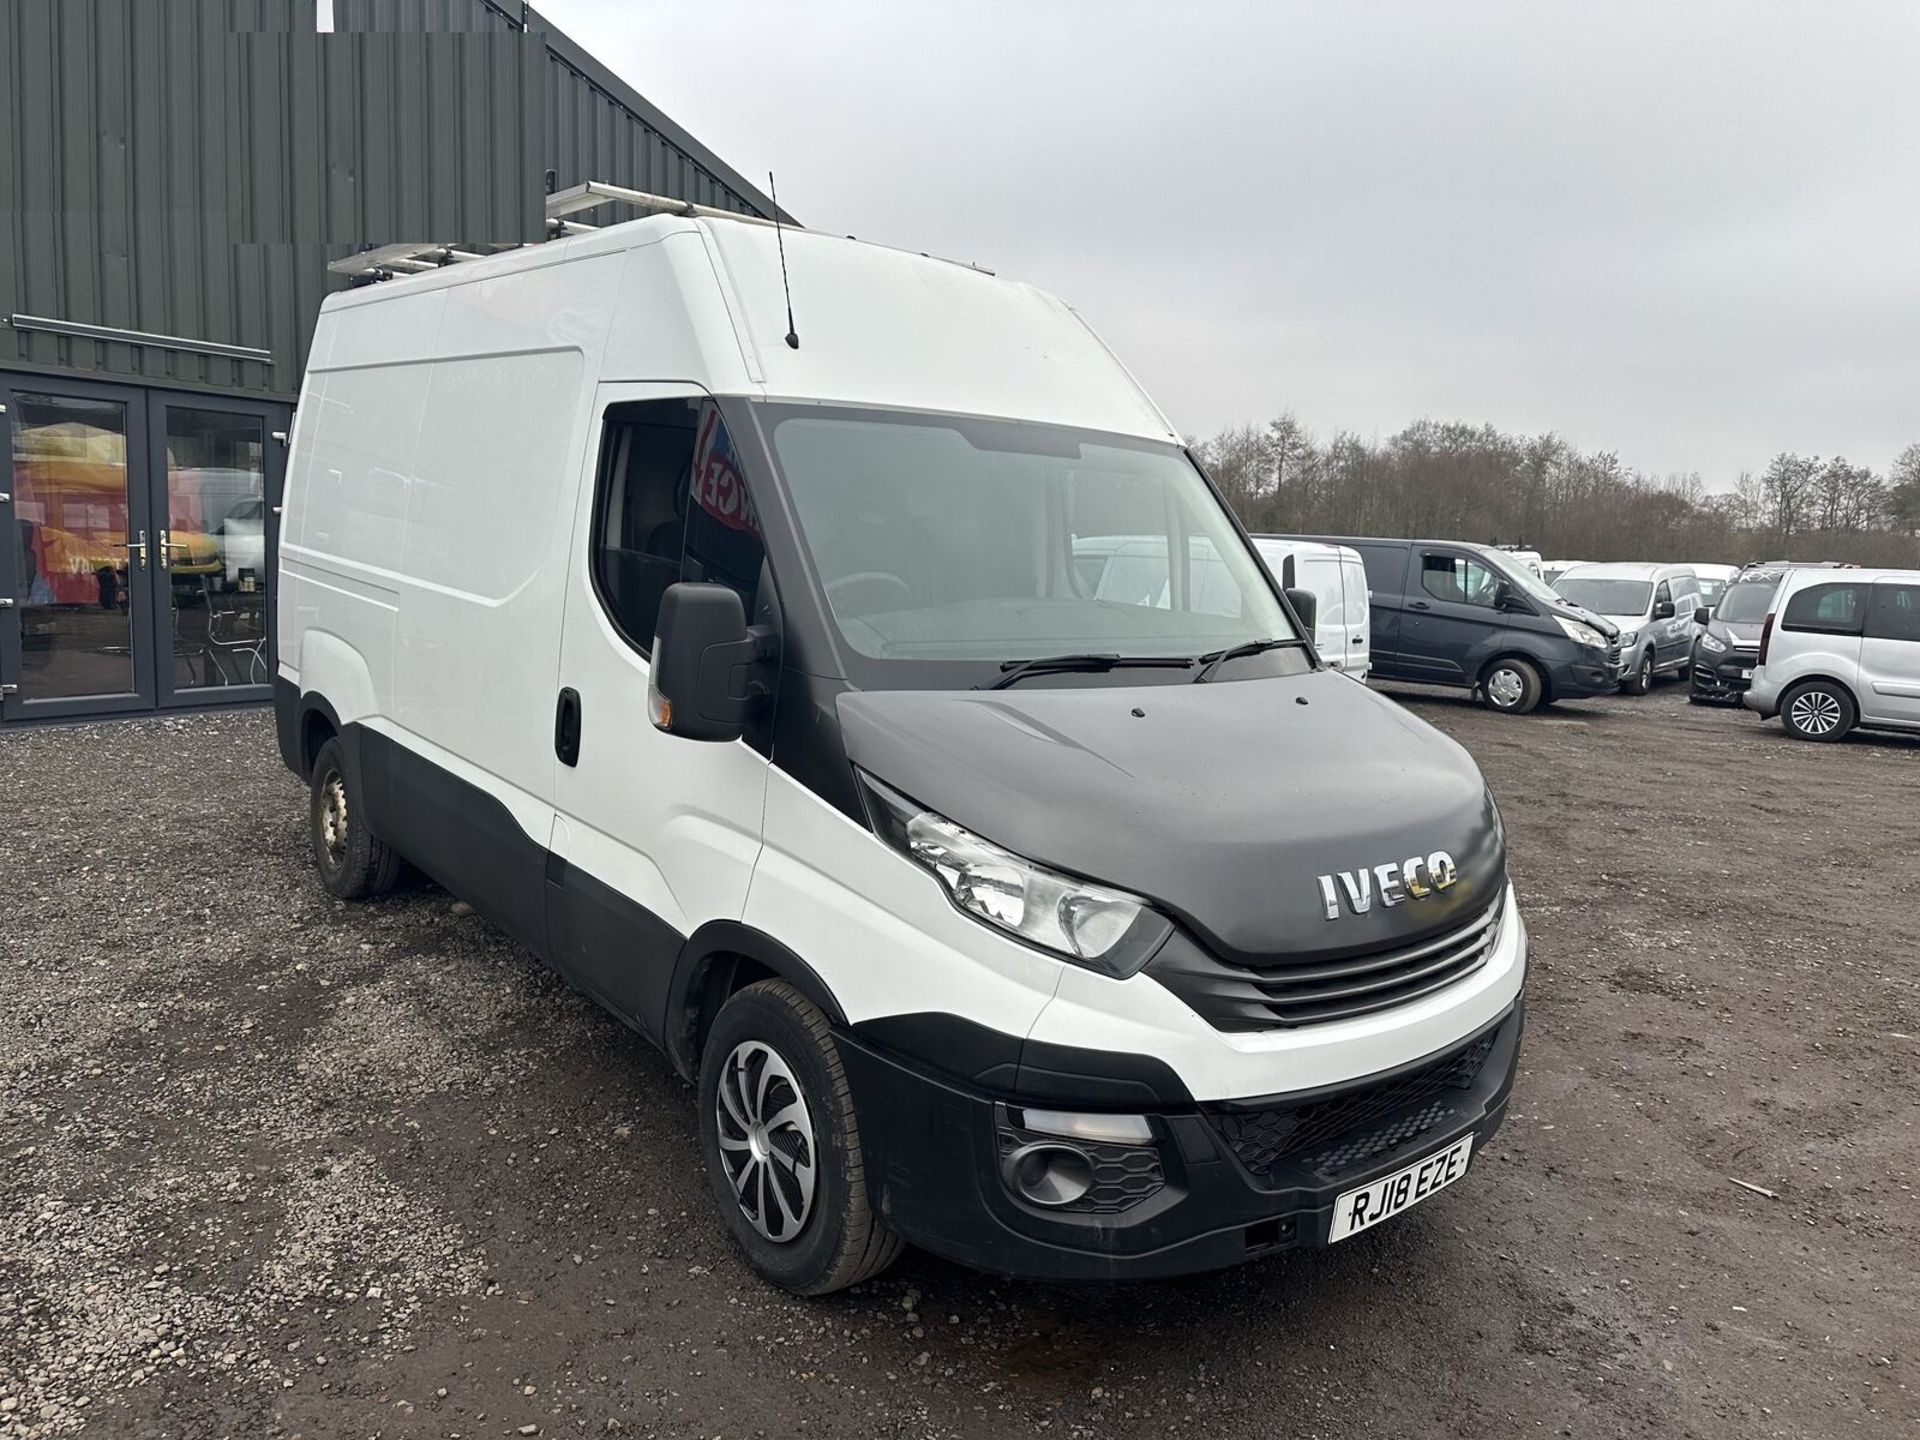 TURBO TROUBLE: 2018 IVECO DAILY HIGH ROOF VAN - ULEZ EURO 6 DEAL